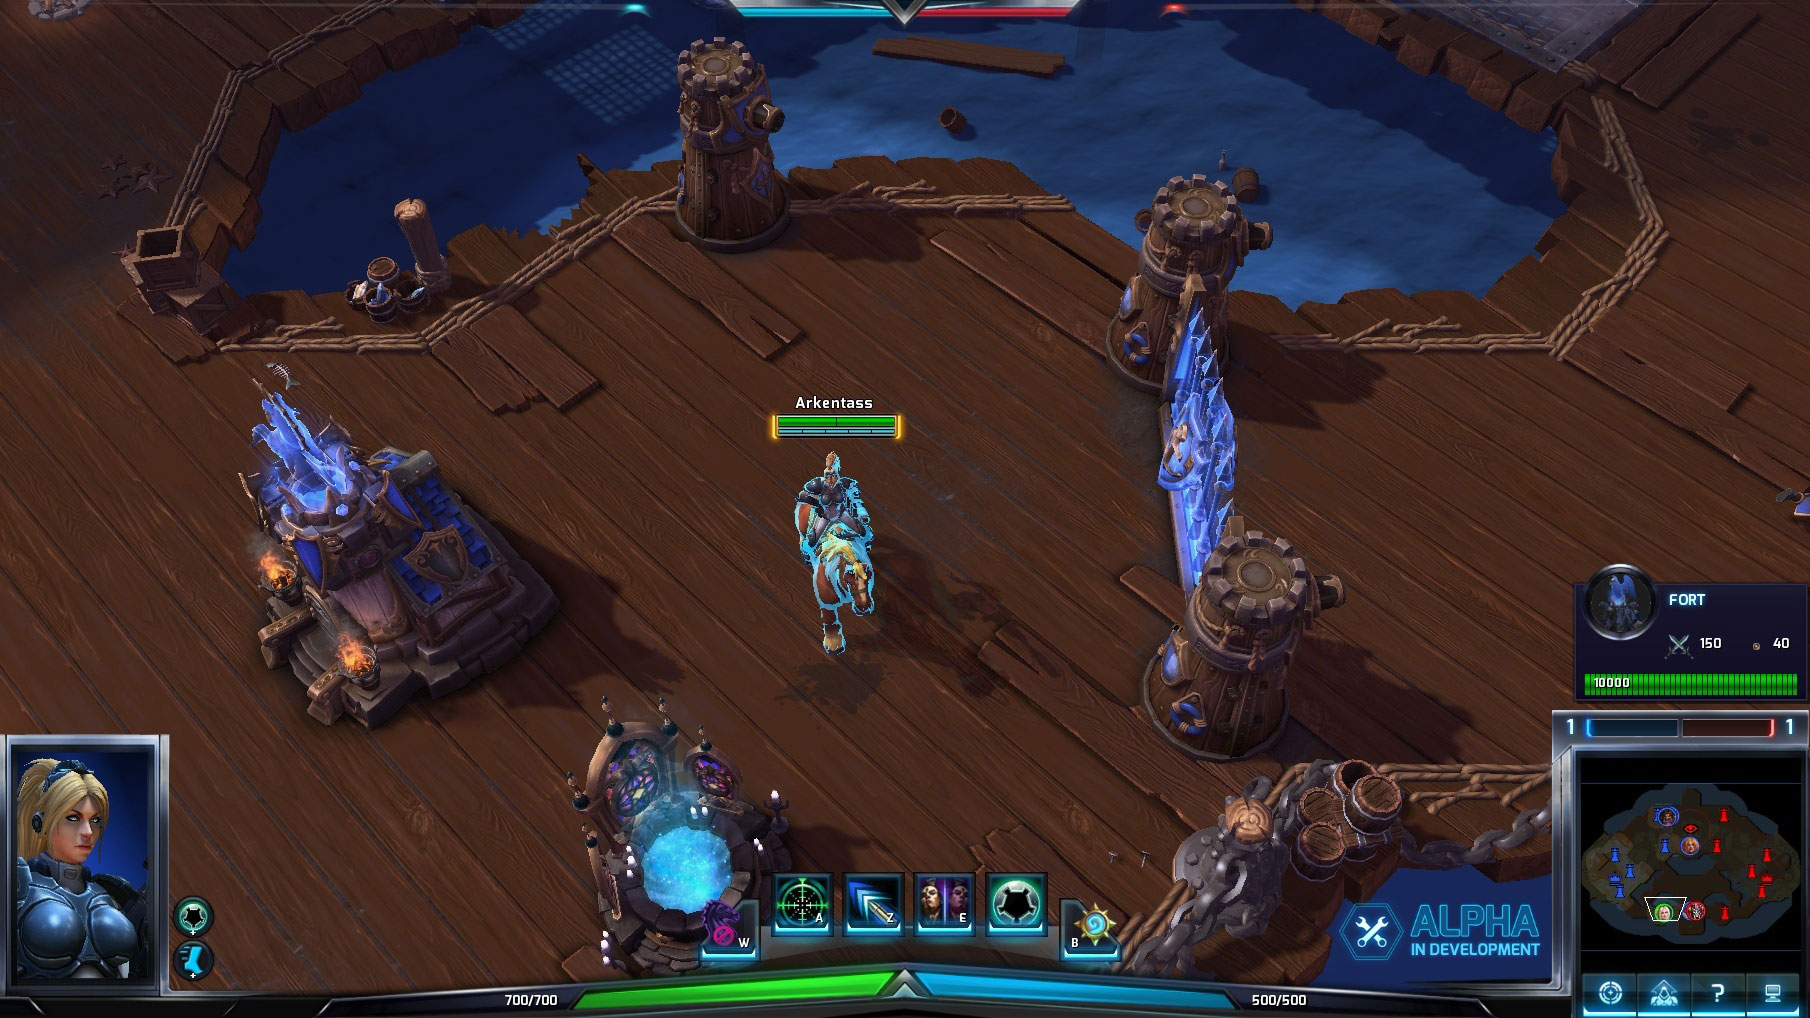 Le fort dans Heroes of the Storm.